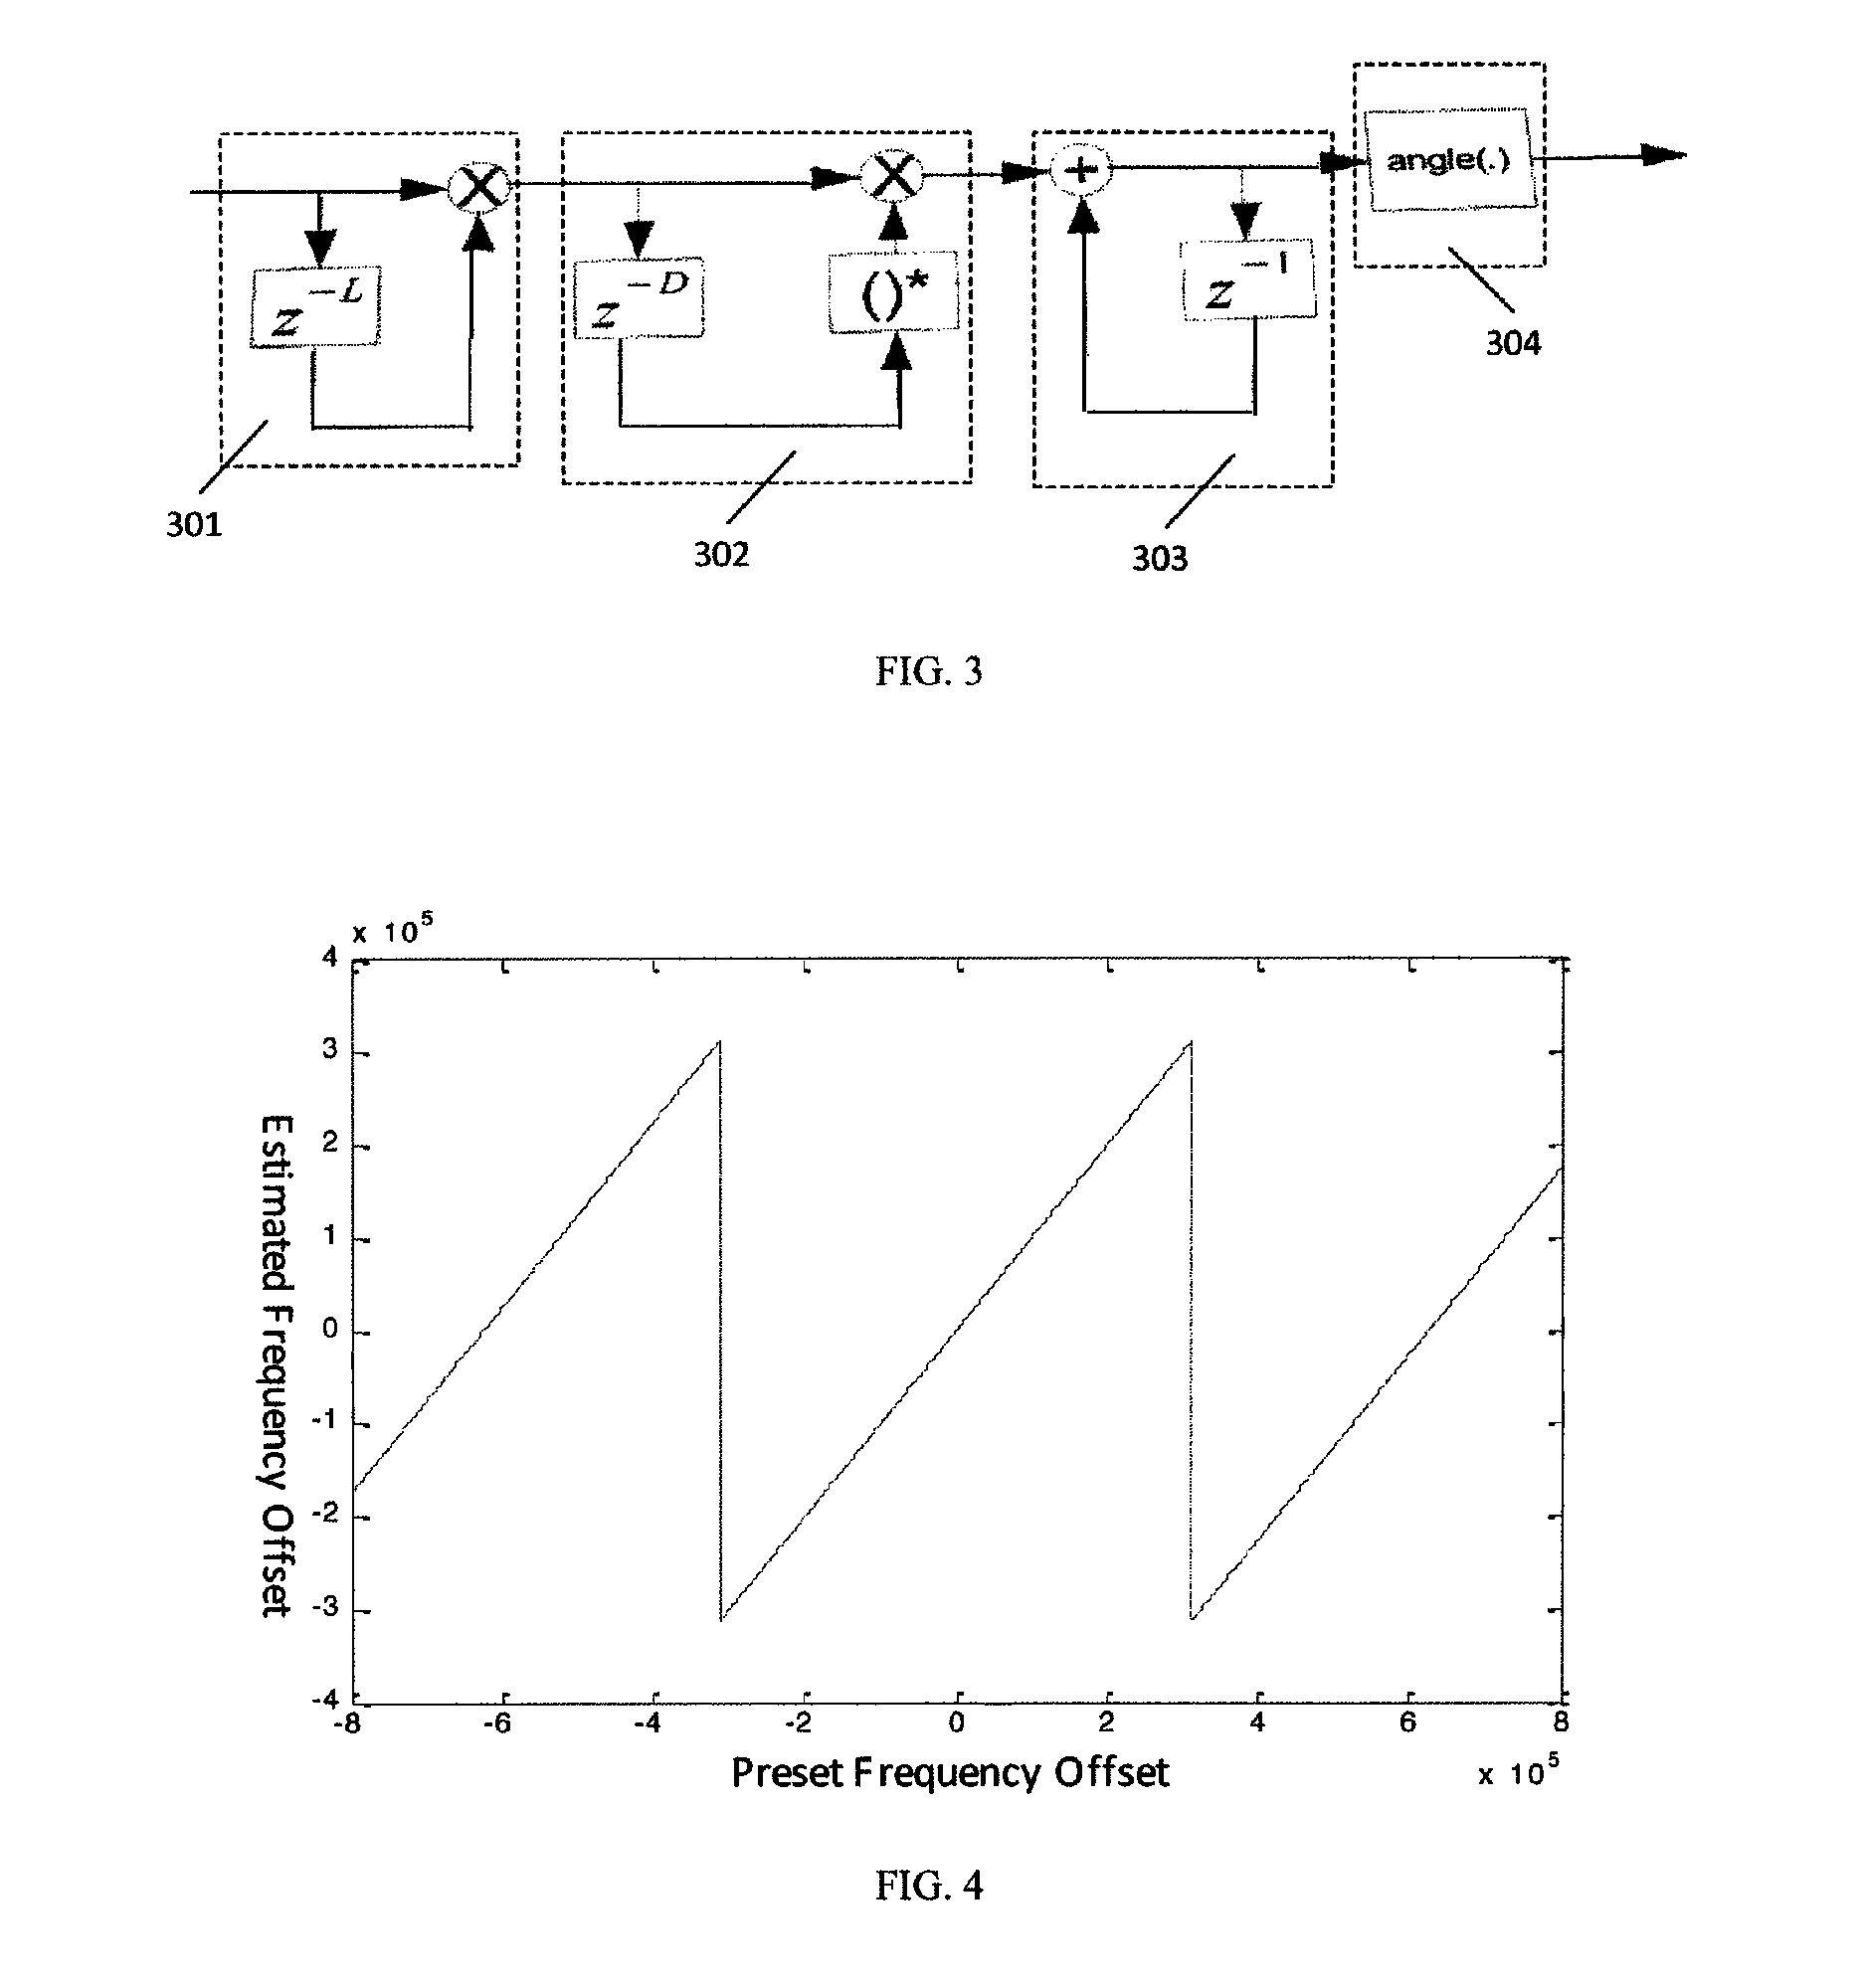 Carrier frequency acquisition method and apparatus